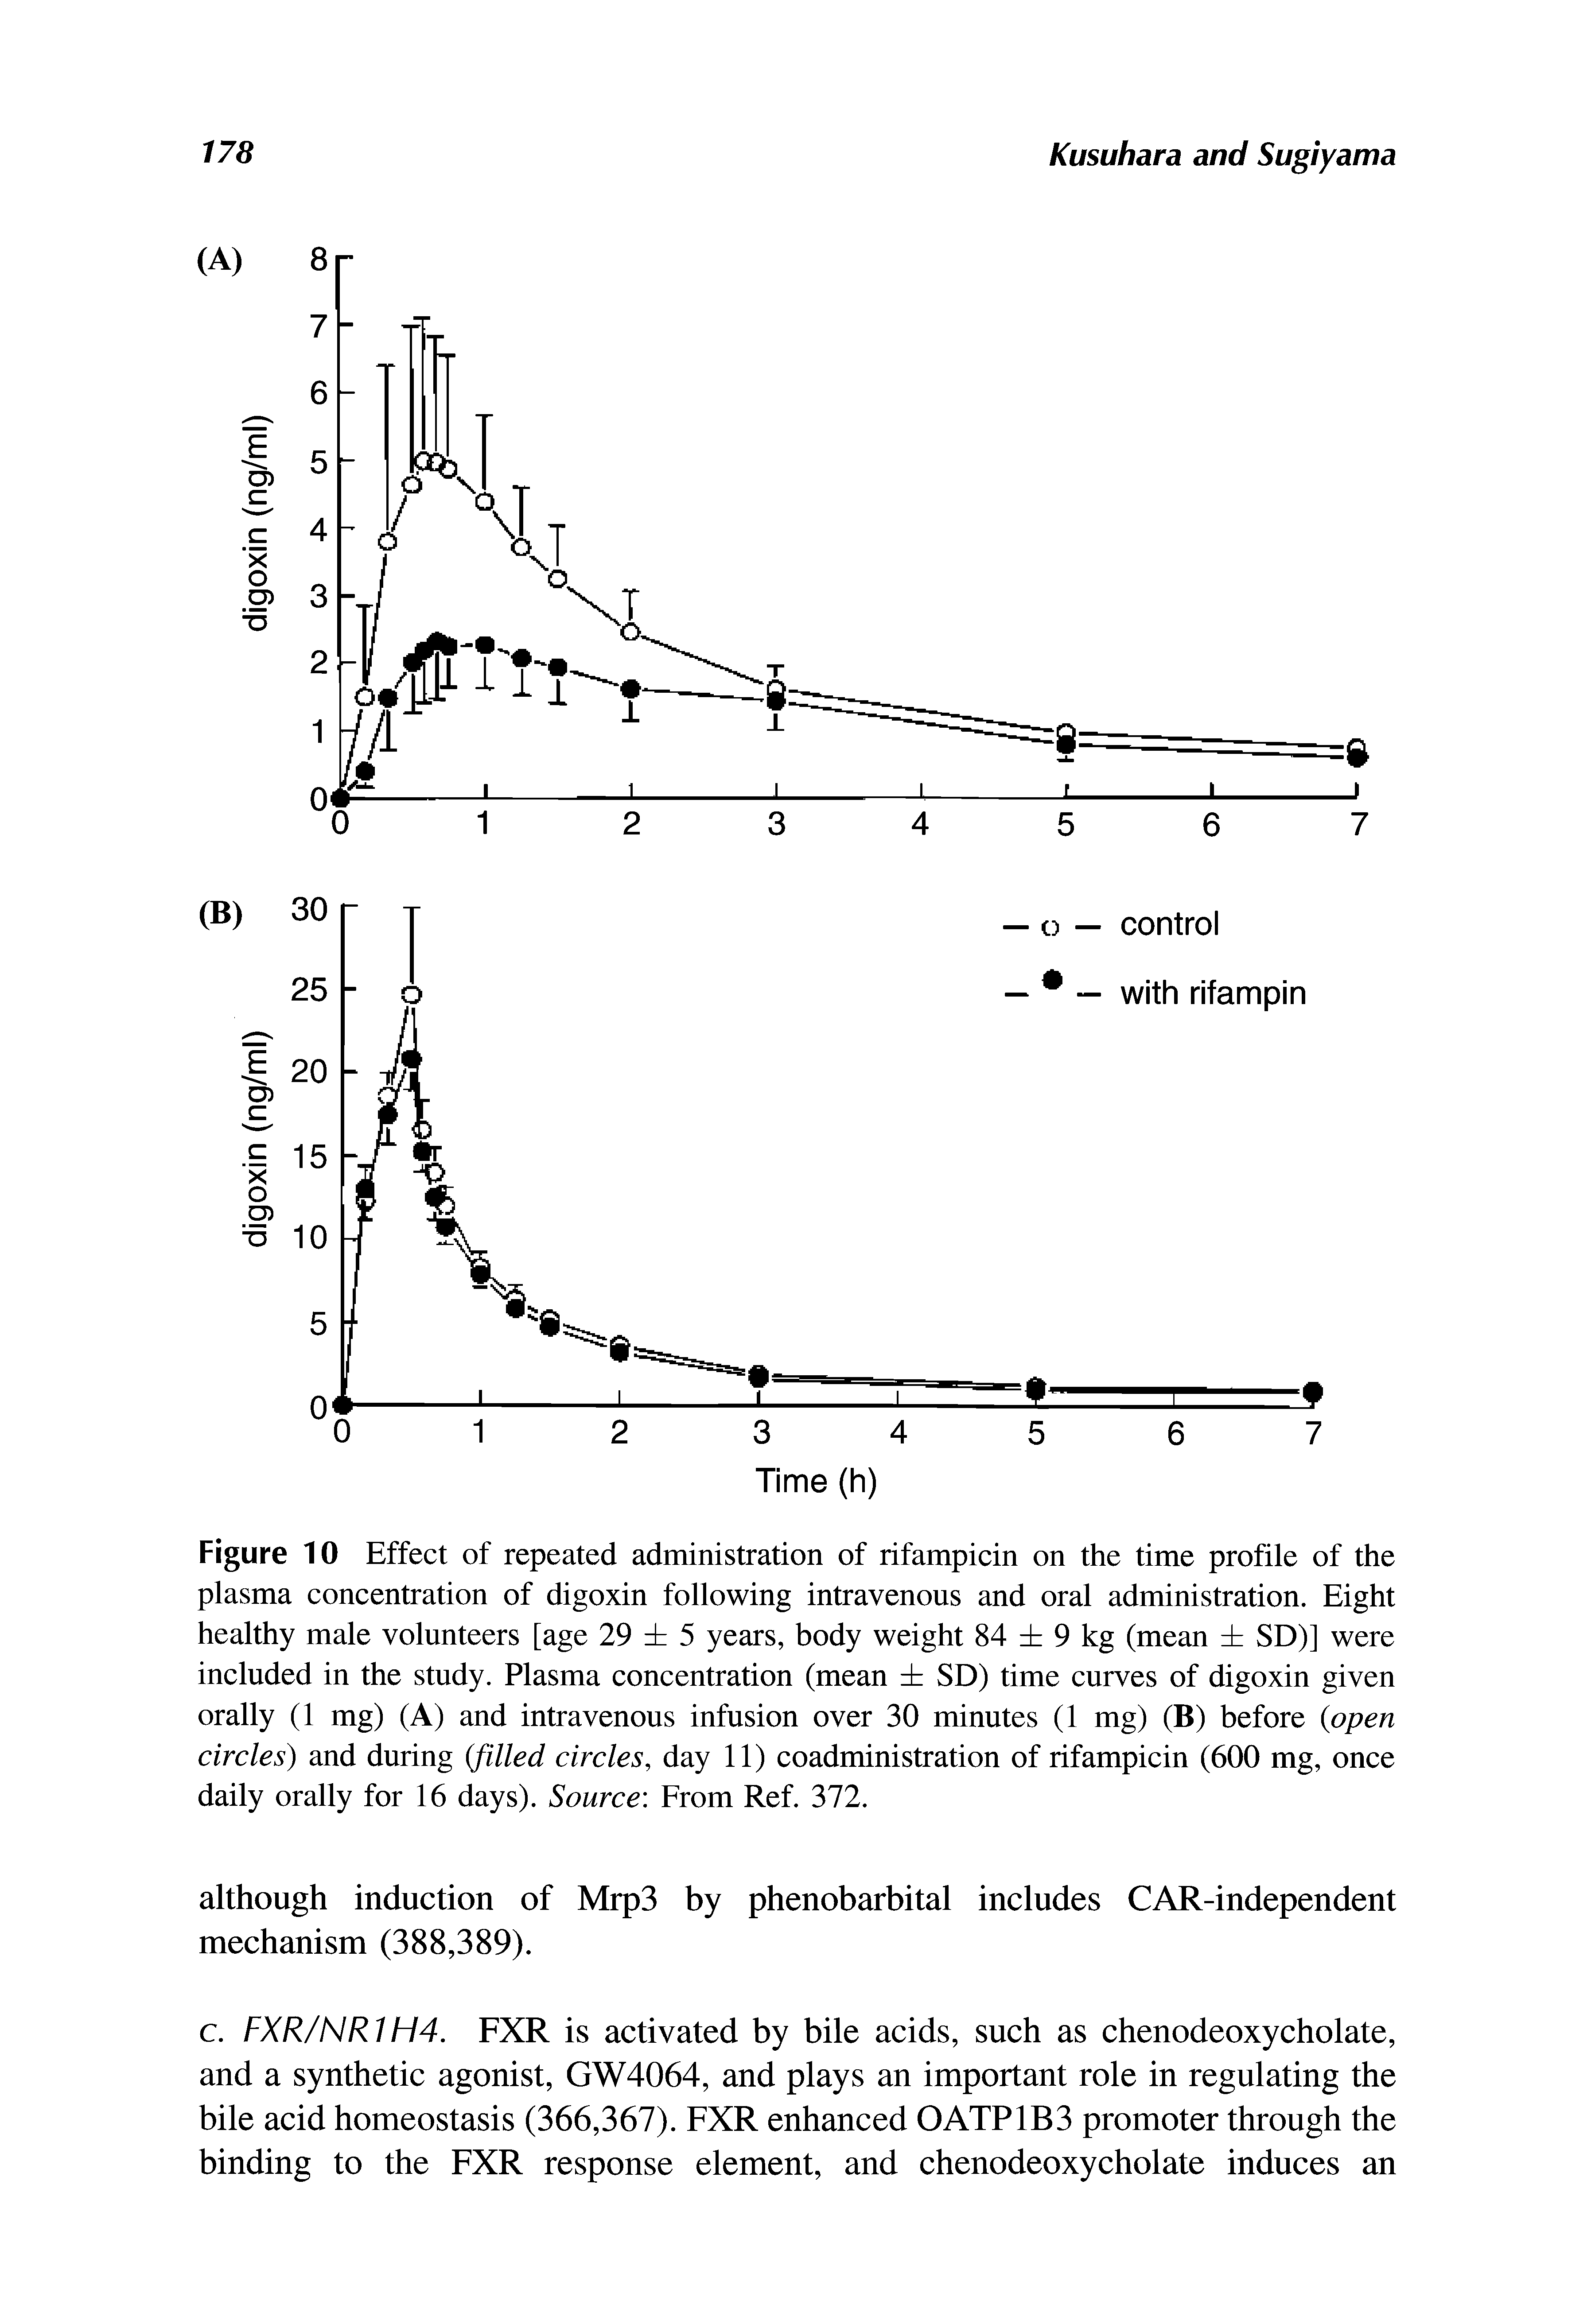 Figure 10 Effect of repeated administration of rifampicin on the time profile of the plasma concentration of digoxin following intravenous and oral administration. Eight healthy male volunteers [age 29 5 years, body weight 84 9 kg (mean SD)] were included in the study. Plasma concentration (mean SD) time curves of digoxin given orally (1 mg) (A) and intravenous infusion over 30 minutes (1 mg) (B) before open circles) and during (filled circles, day 11) coadministration of rifampicin (600 mg, once daily orally for 16 days). Source From Ref. 372.